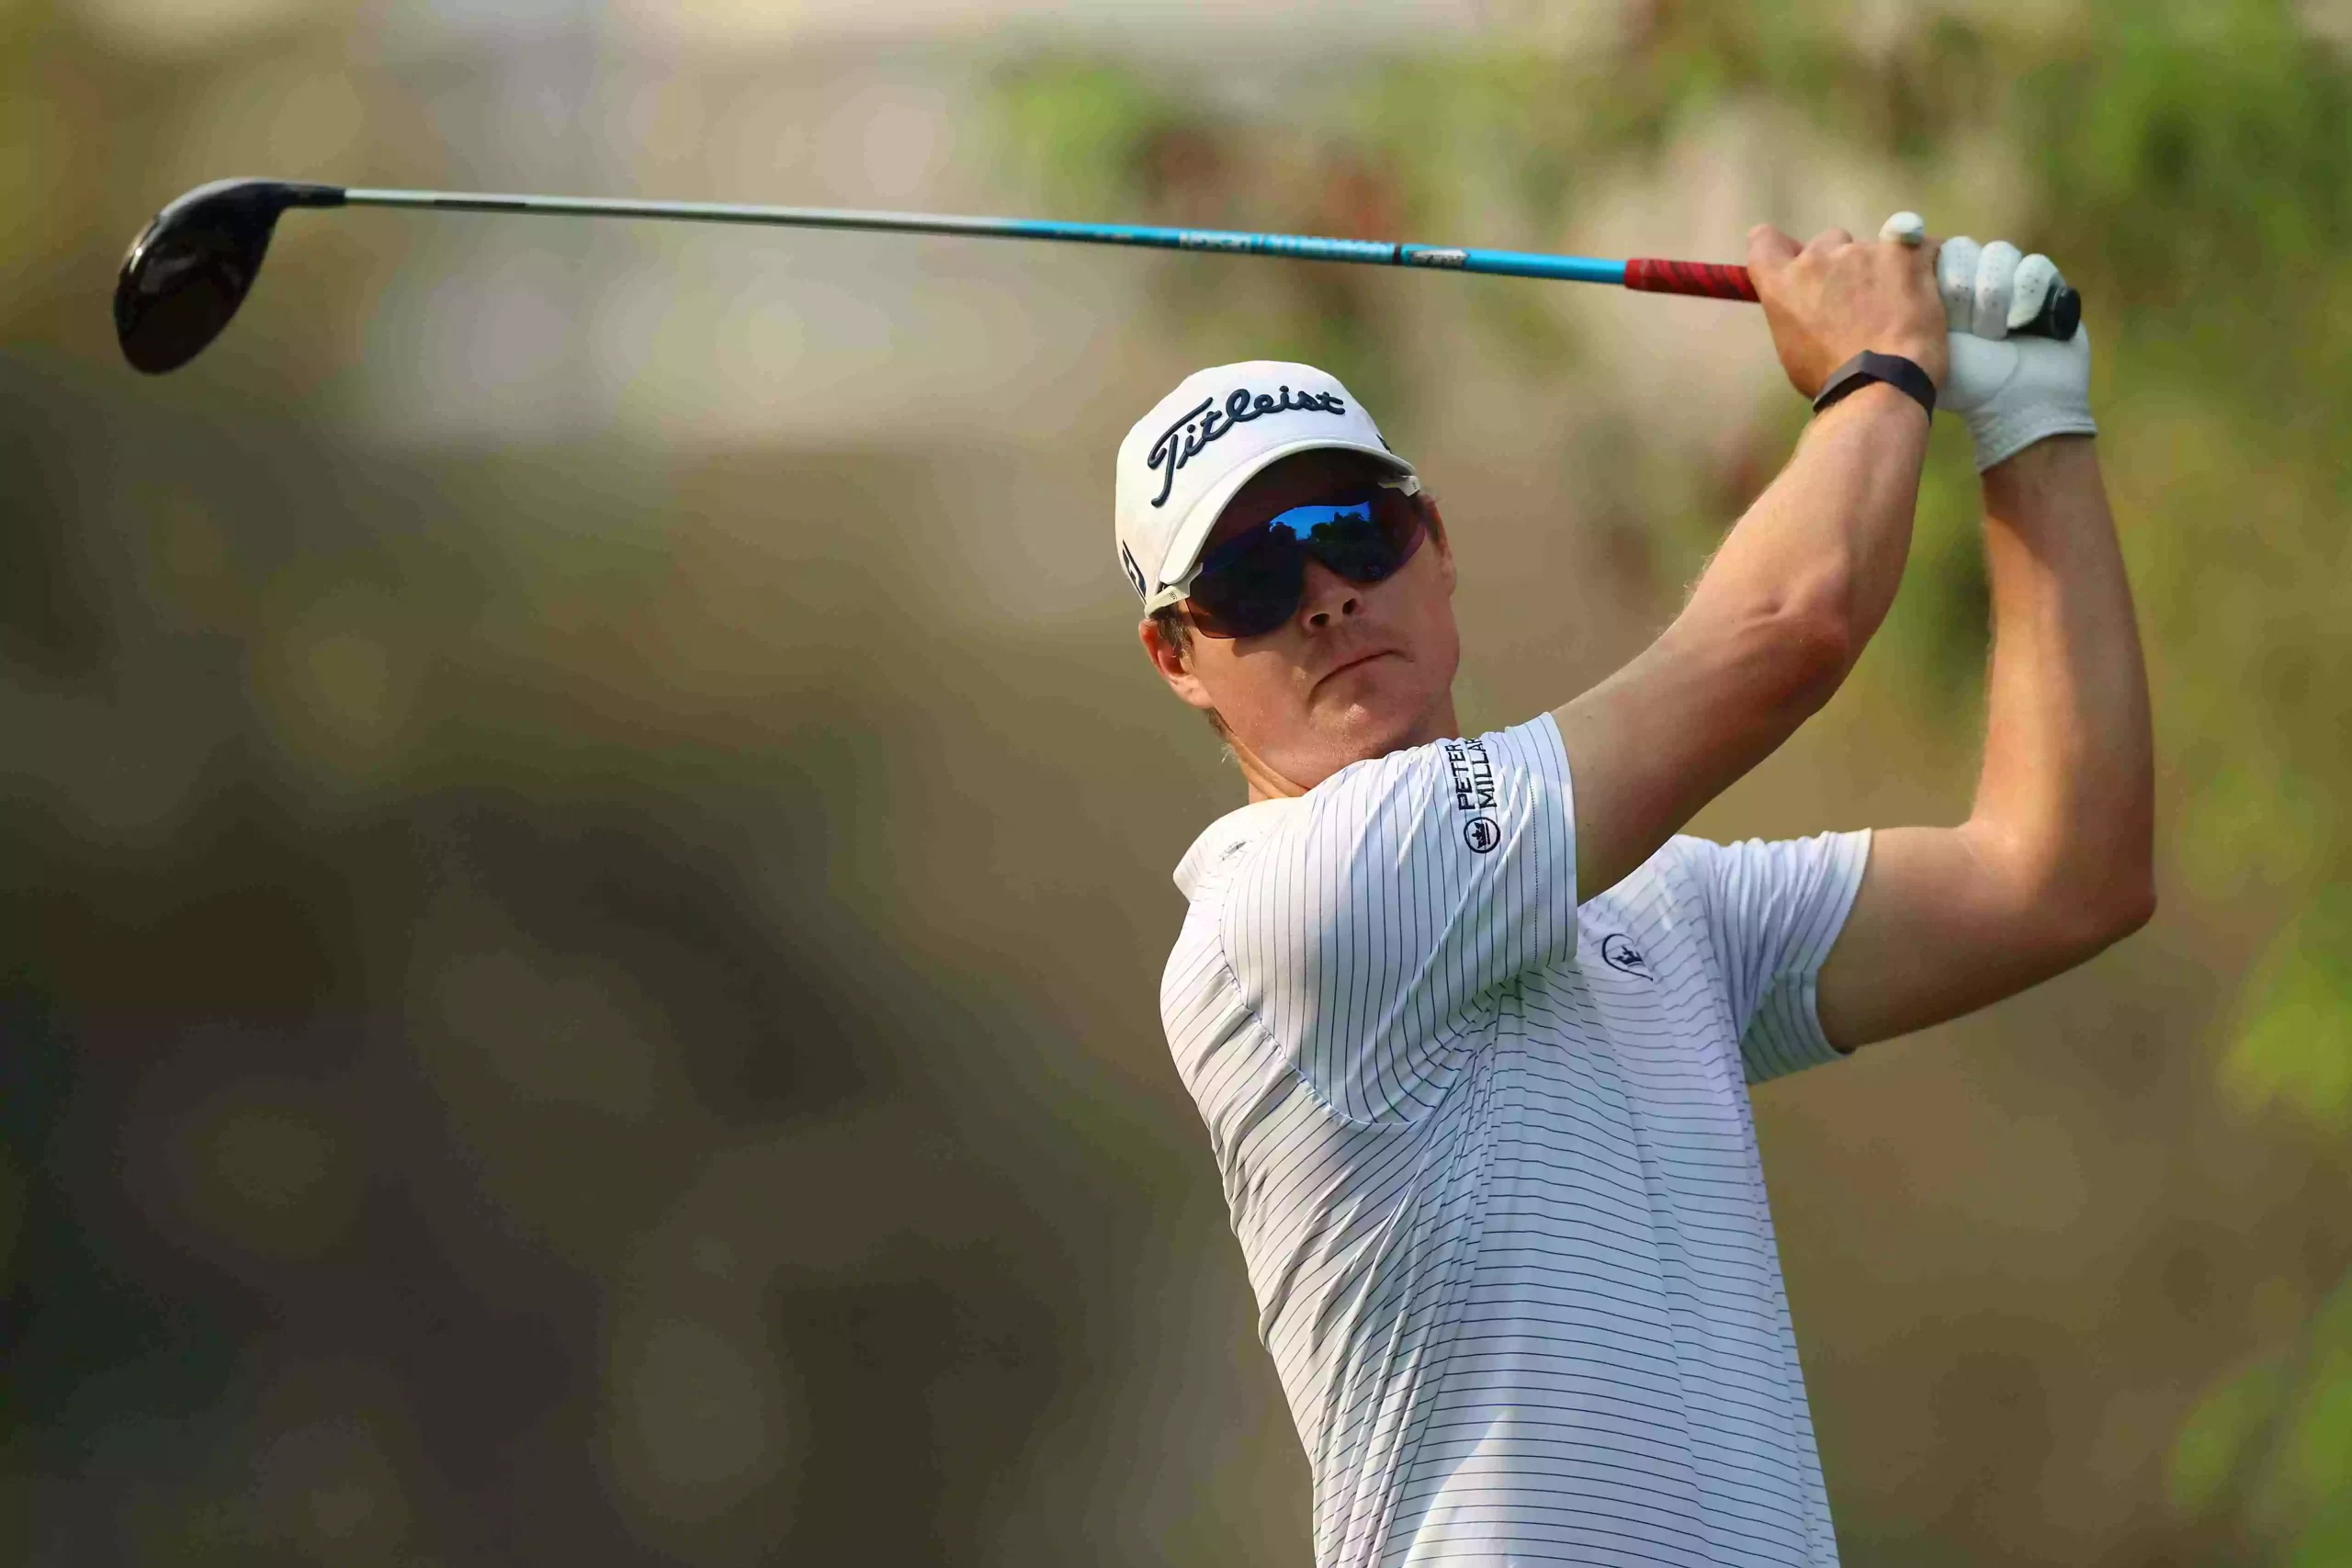 Norway’s Espen Kofstad shatters DLF Golf and Country Club course record